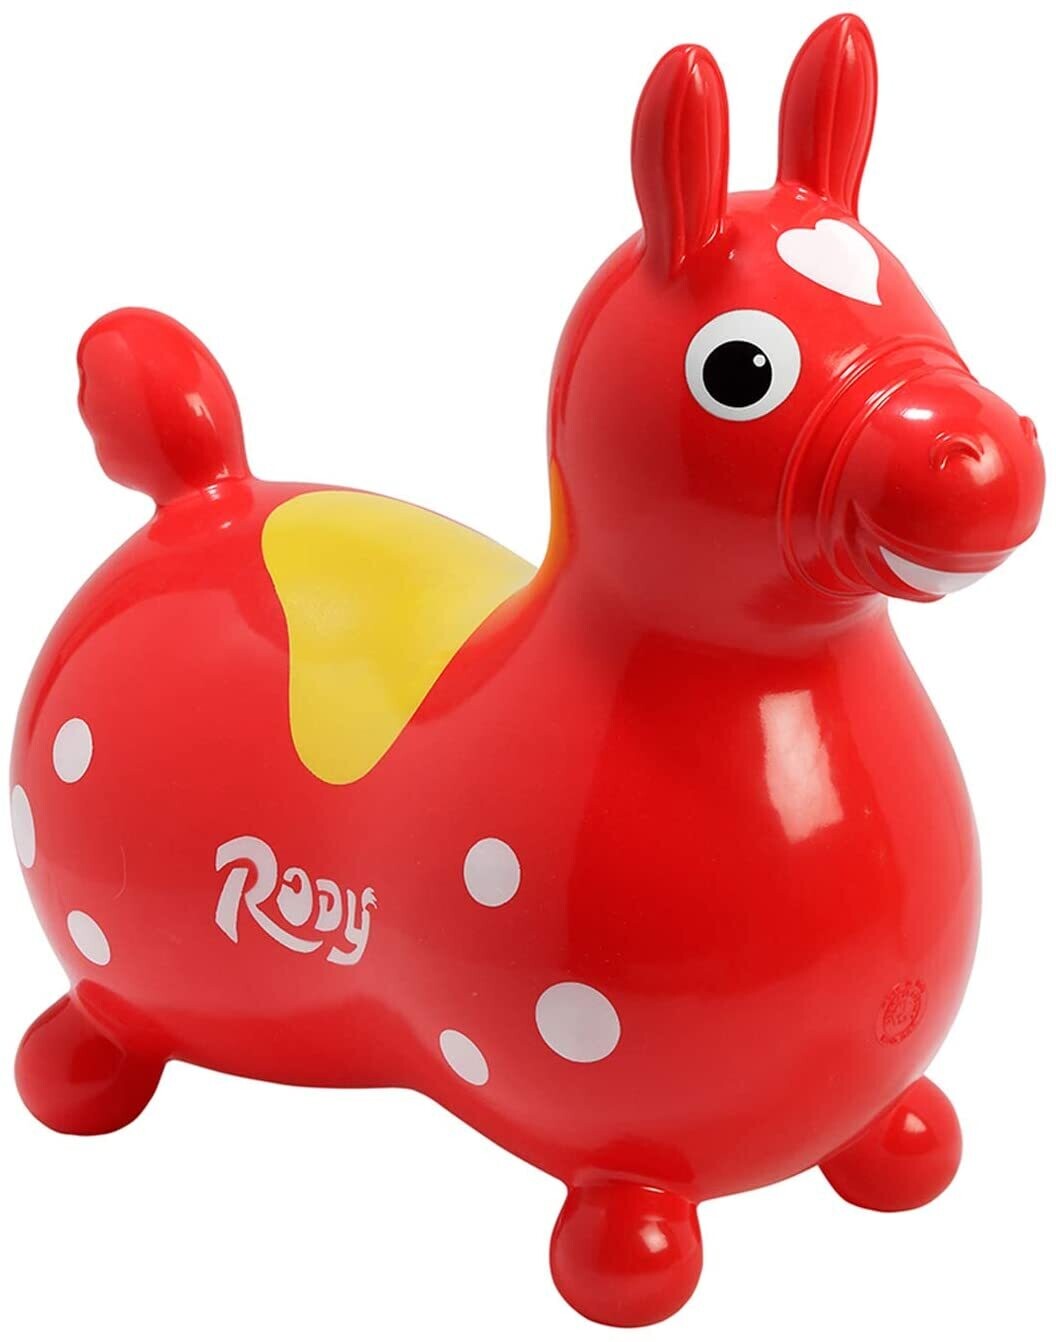 Rody Inflatable Hopping Horse Toy